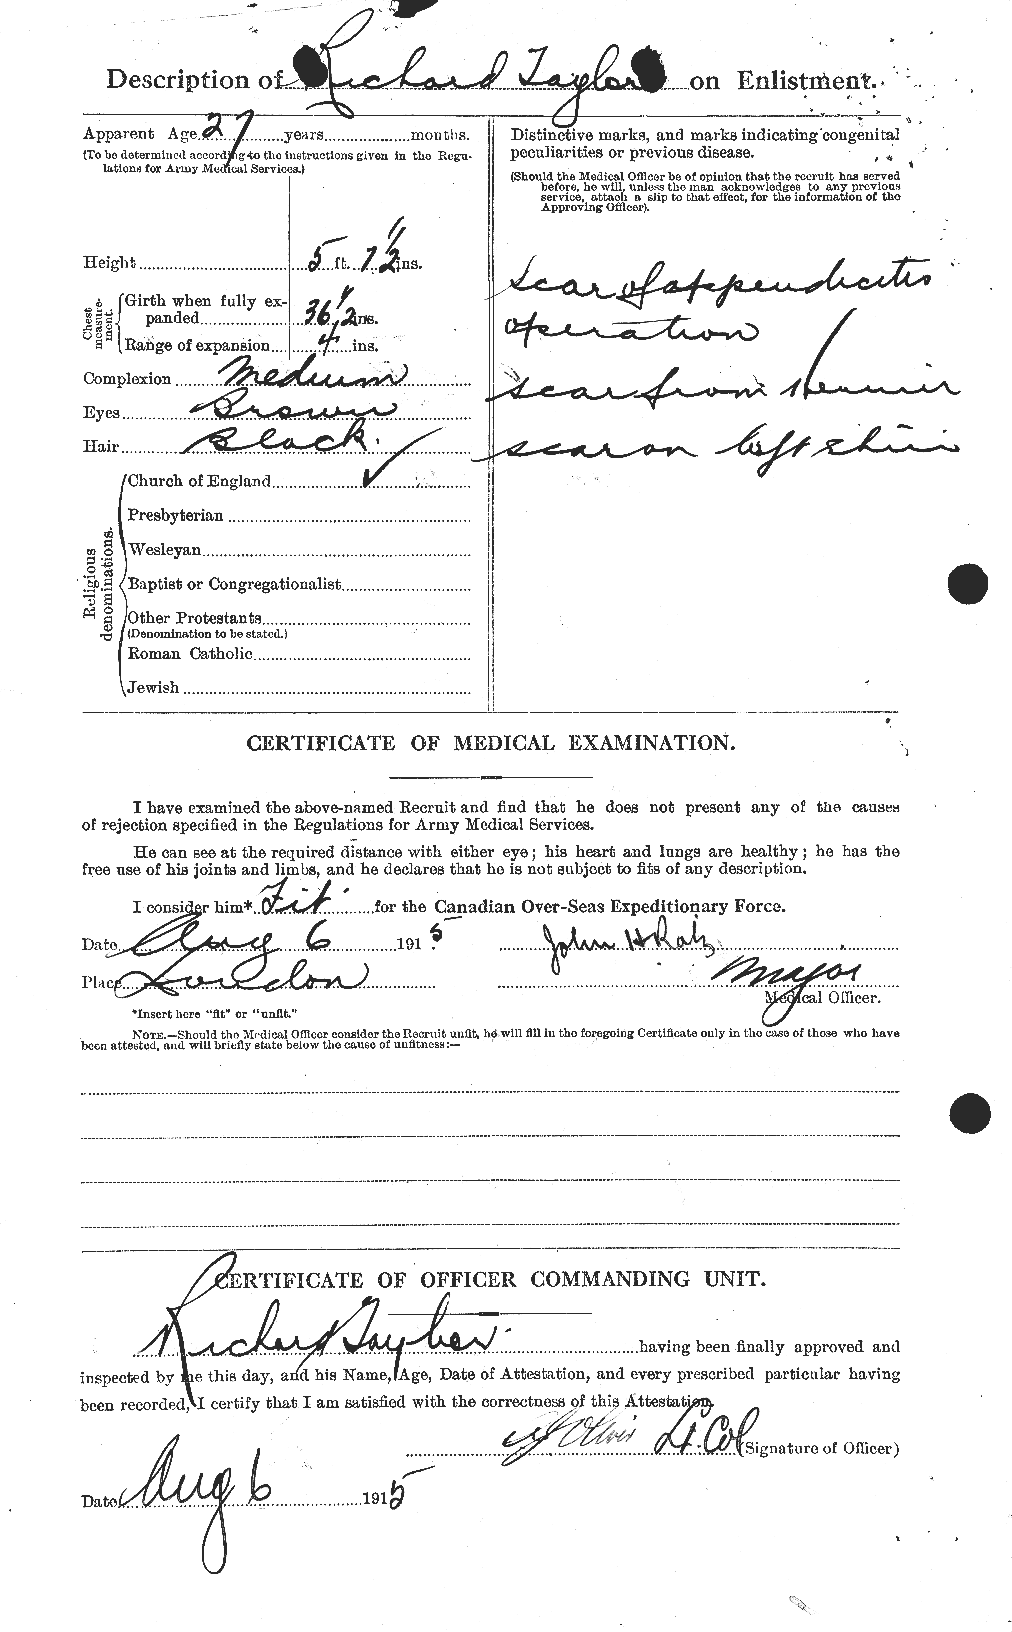 Personnel Records of the First World War - CEF 627817b